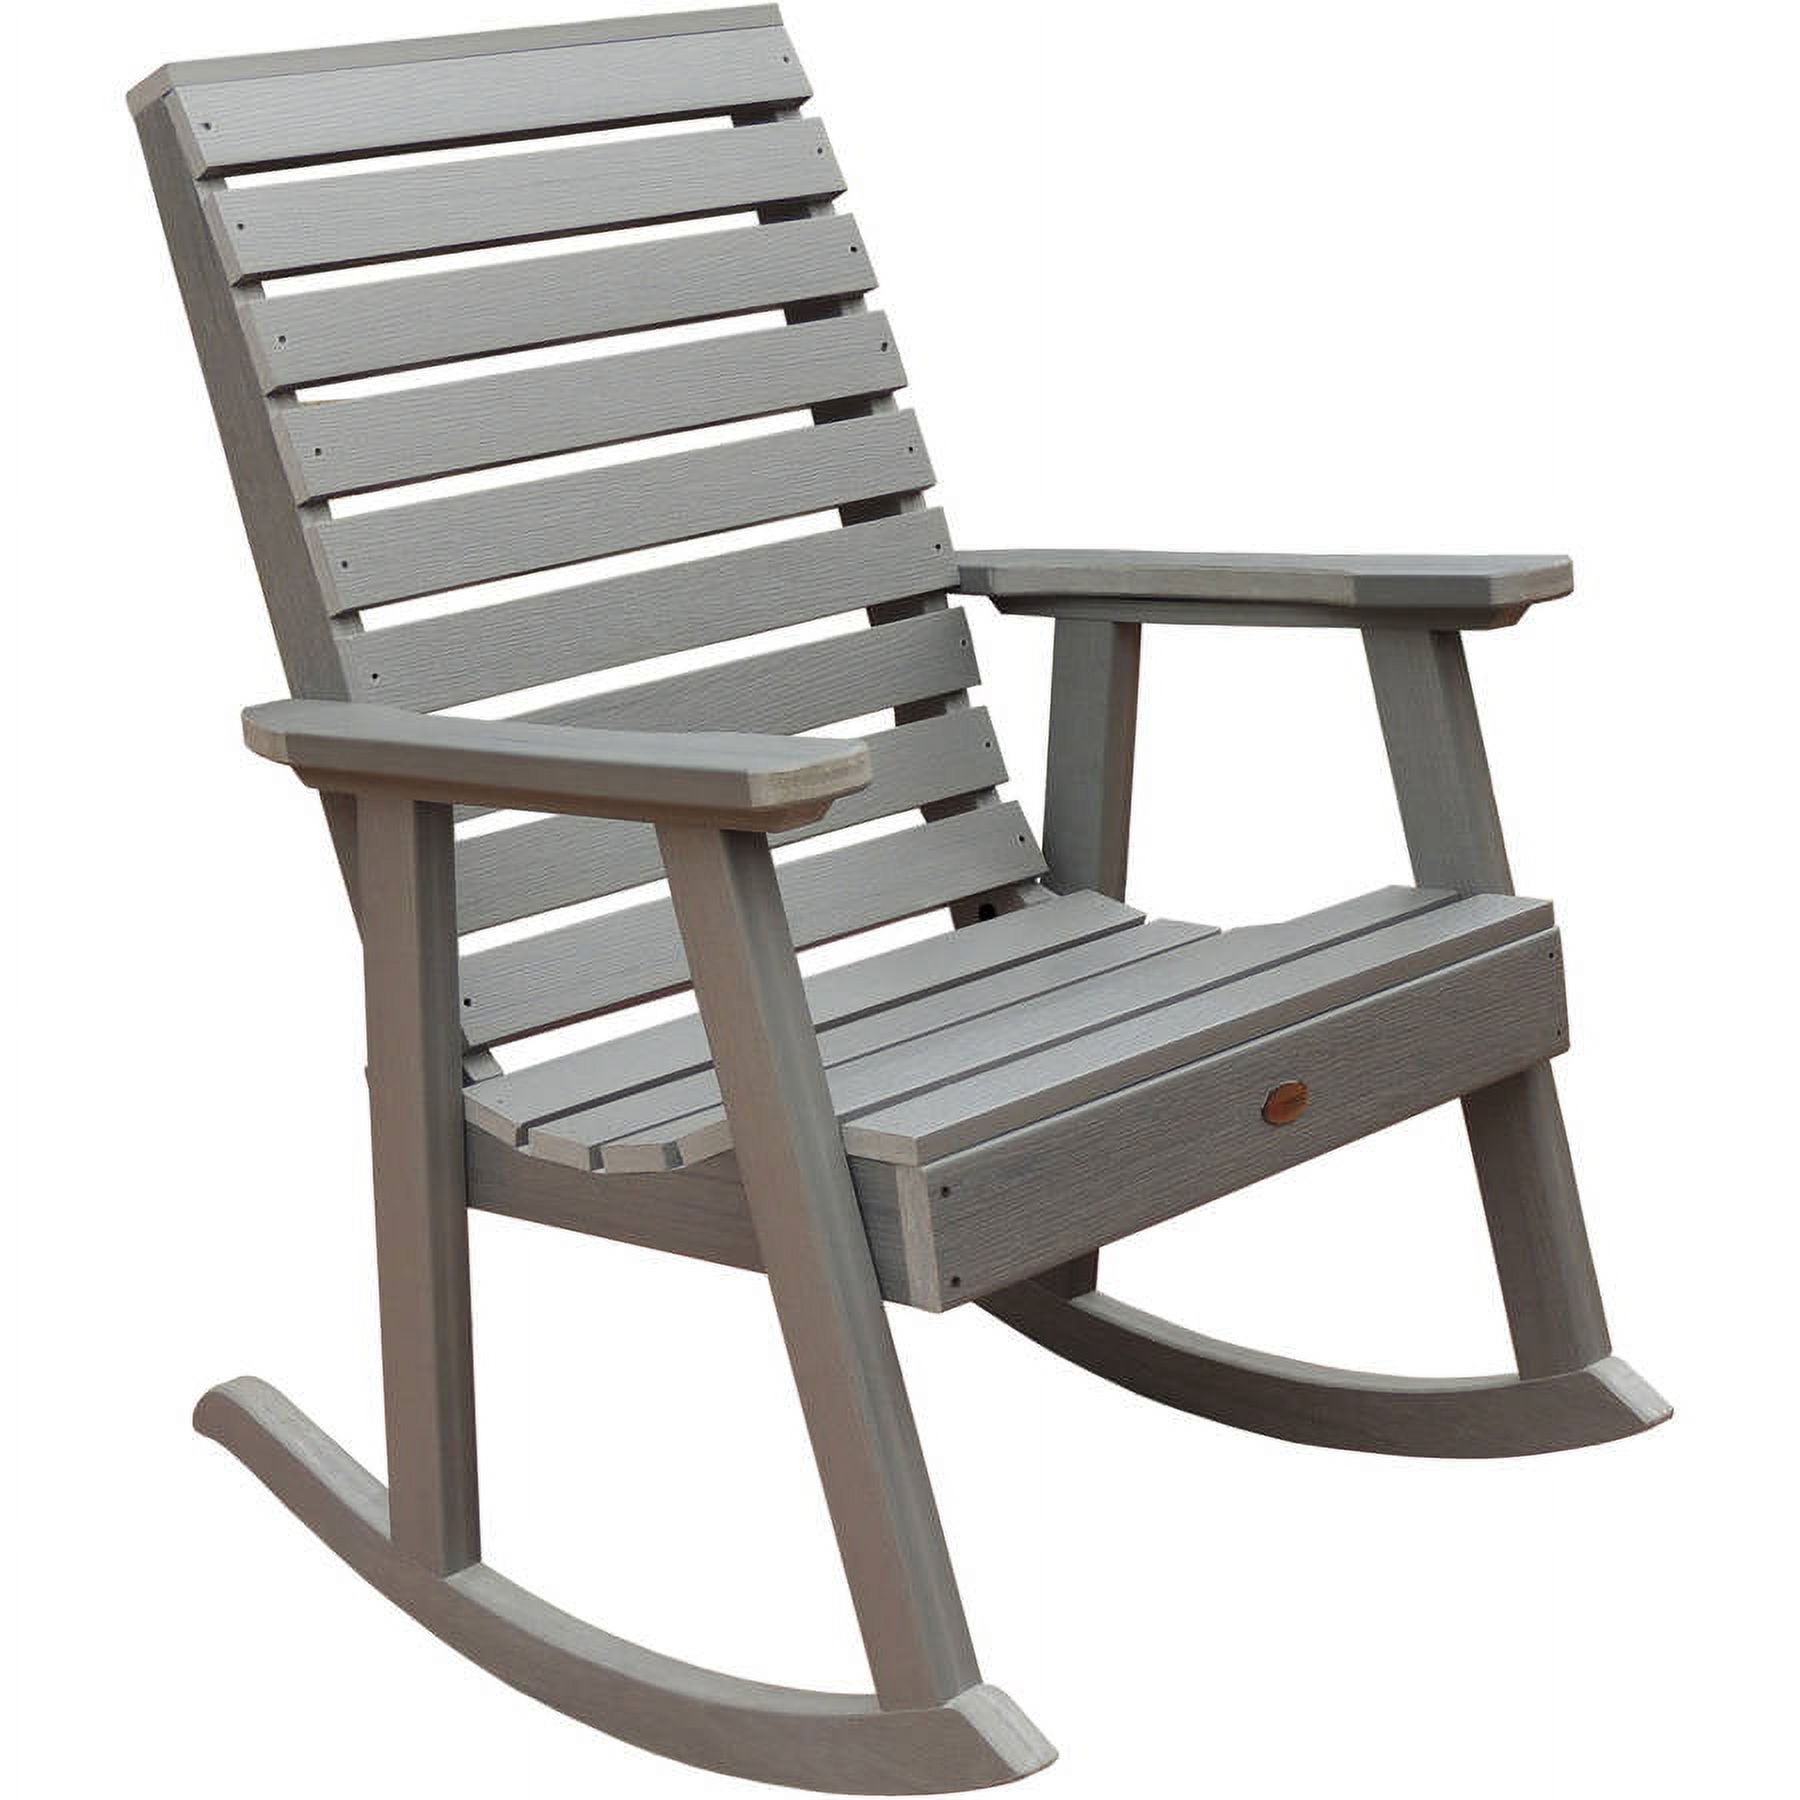 Weatherly Rocking Chair - image 1 of 2